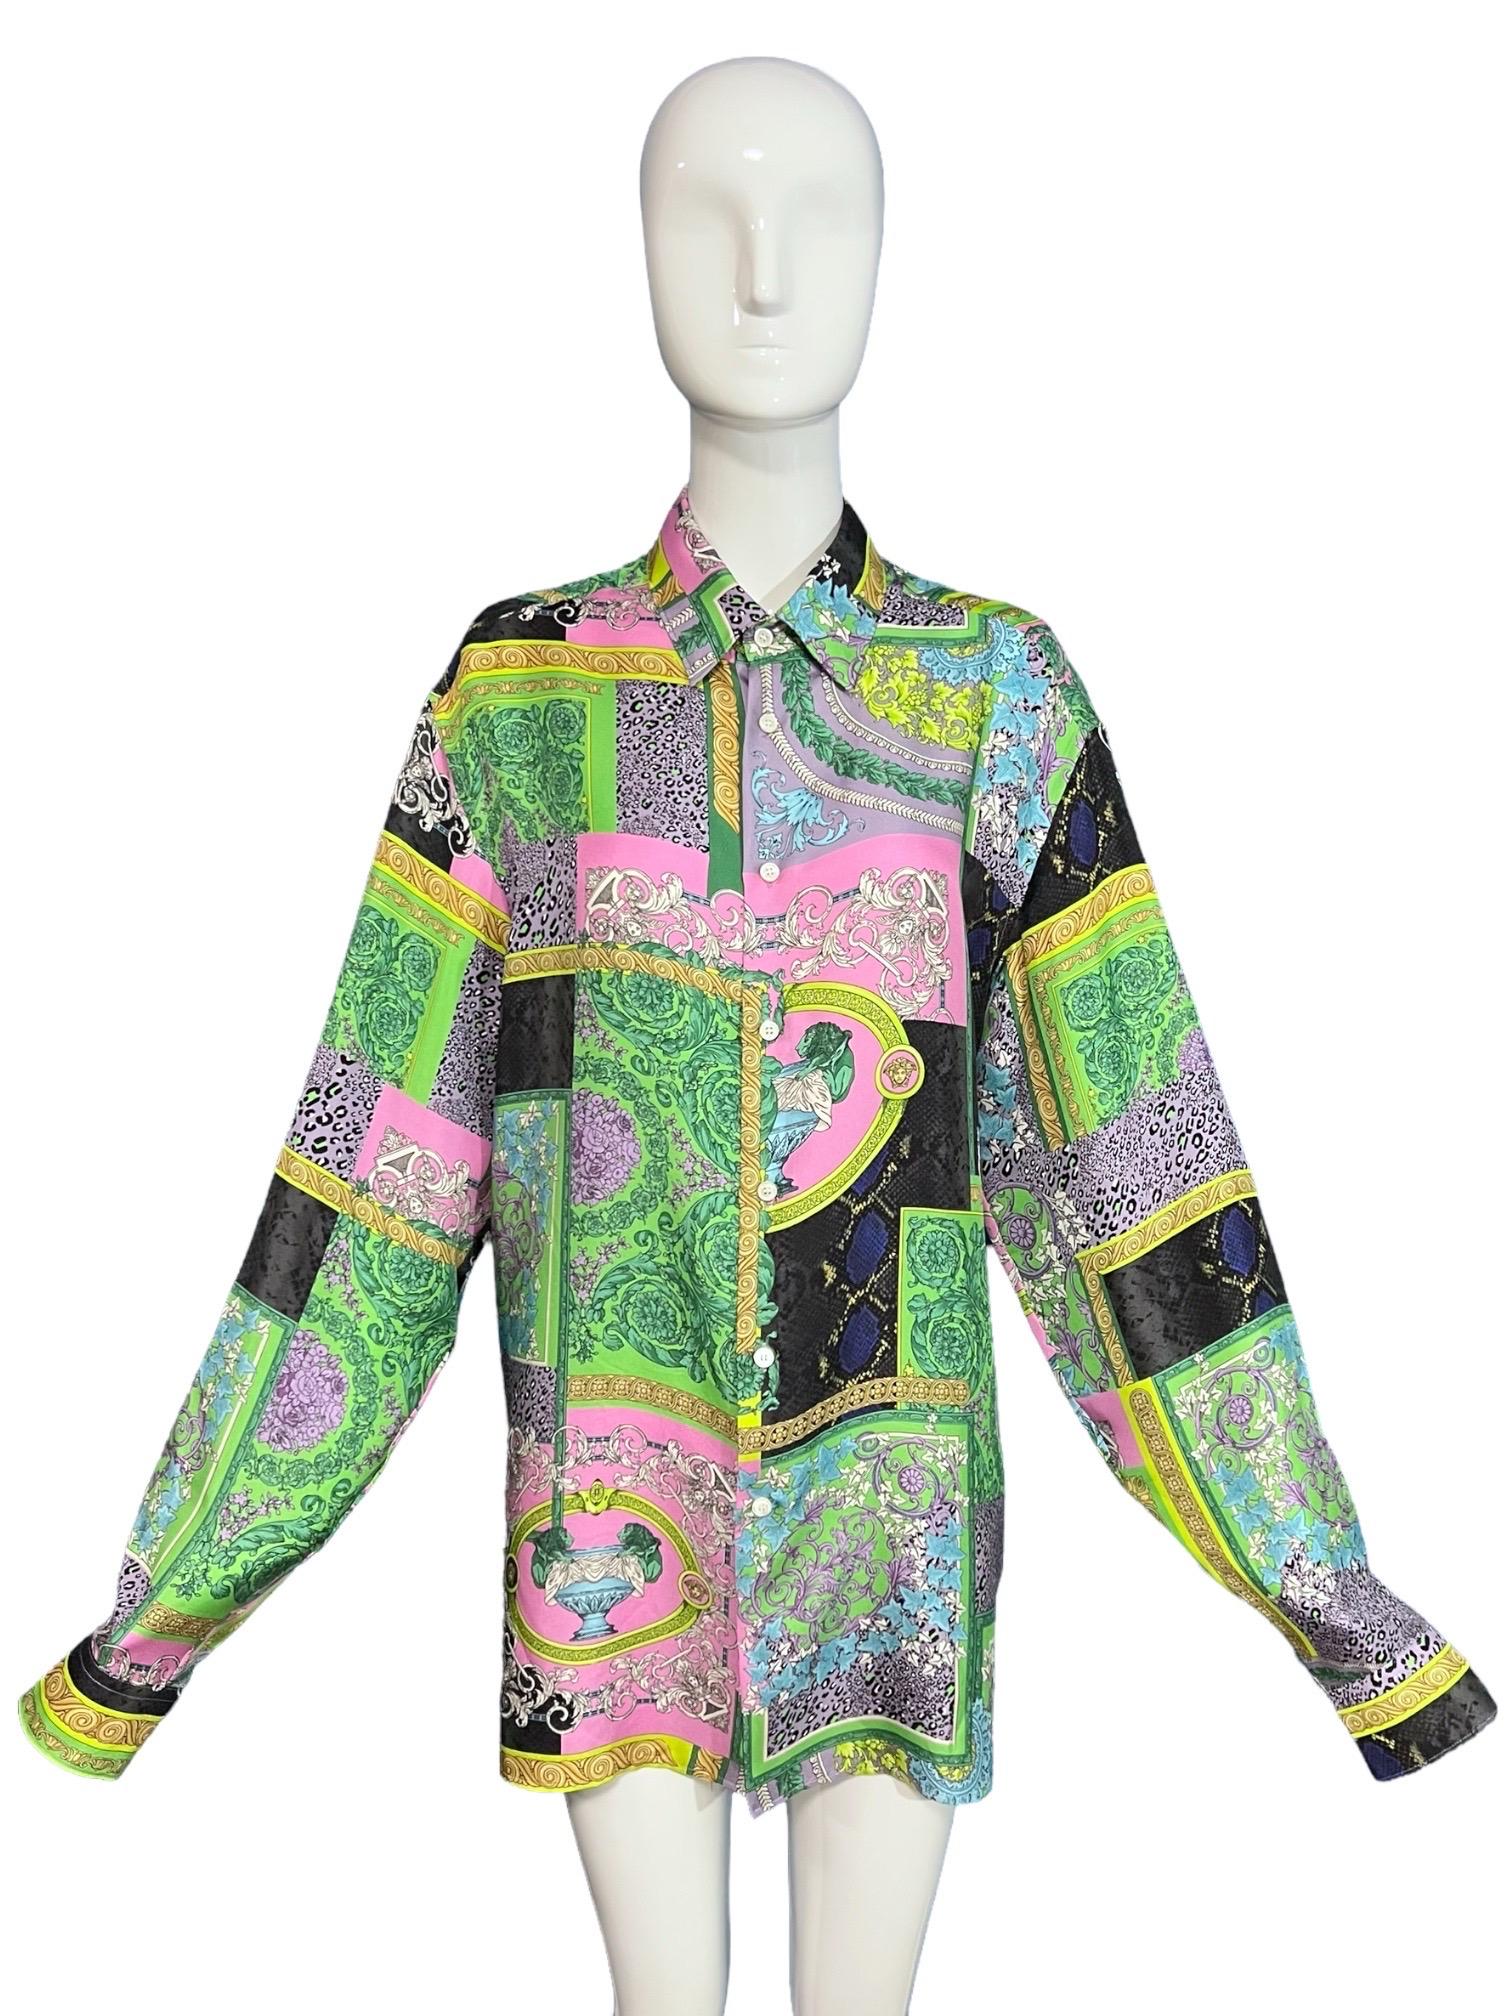 Versace Mosaic Barocco Silk Shirt from the Resort 2021 Flash collection.

Featuring patchwork prints of the brands heritage motifs in radiant pastel multi colors with an animalier pattern throughout.

This shirt was from the limited edition Versace